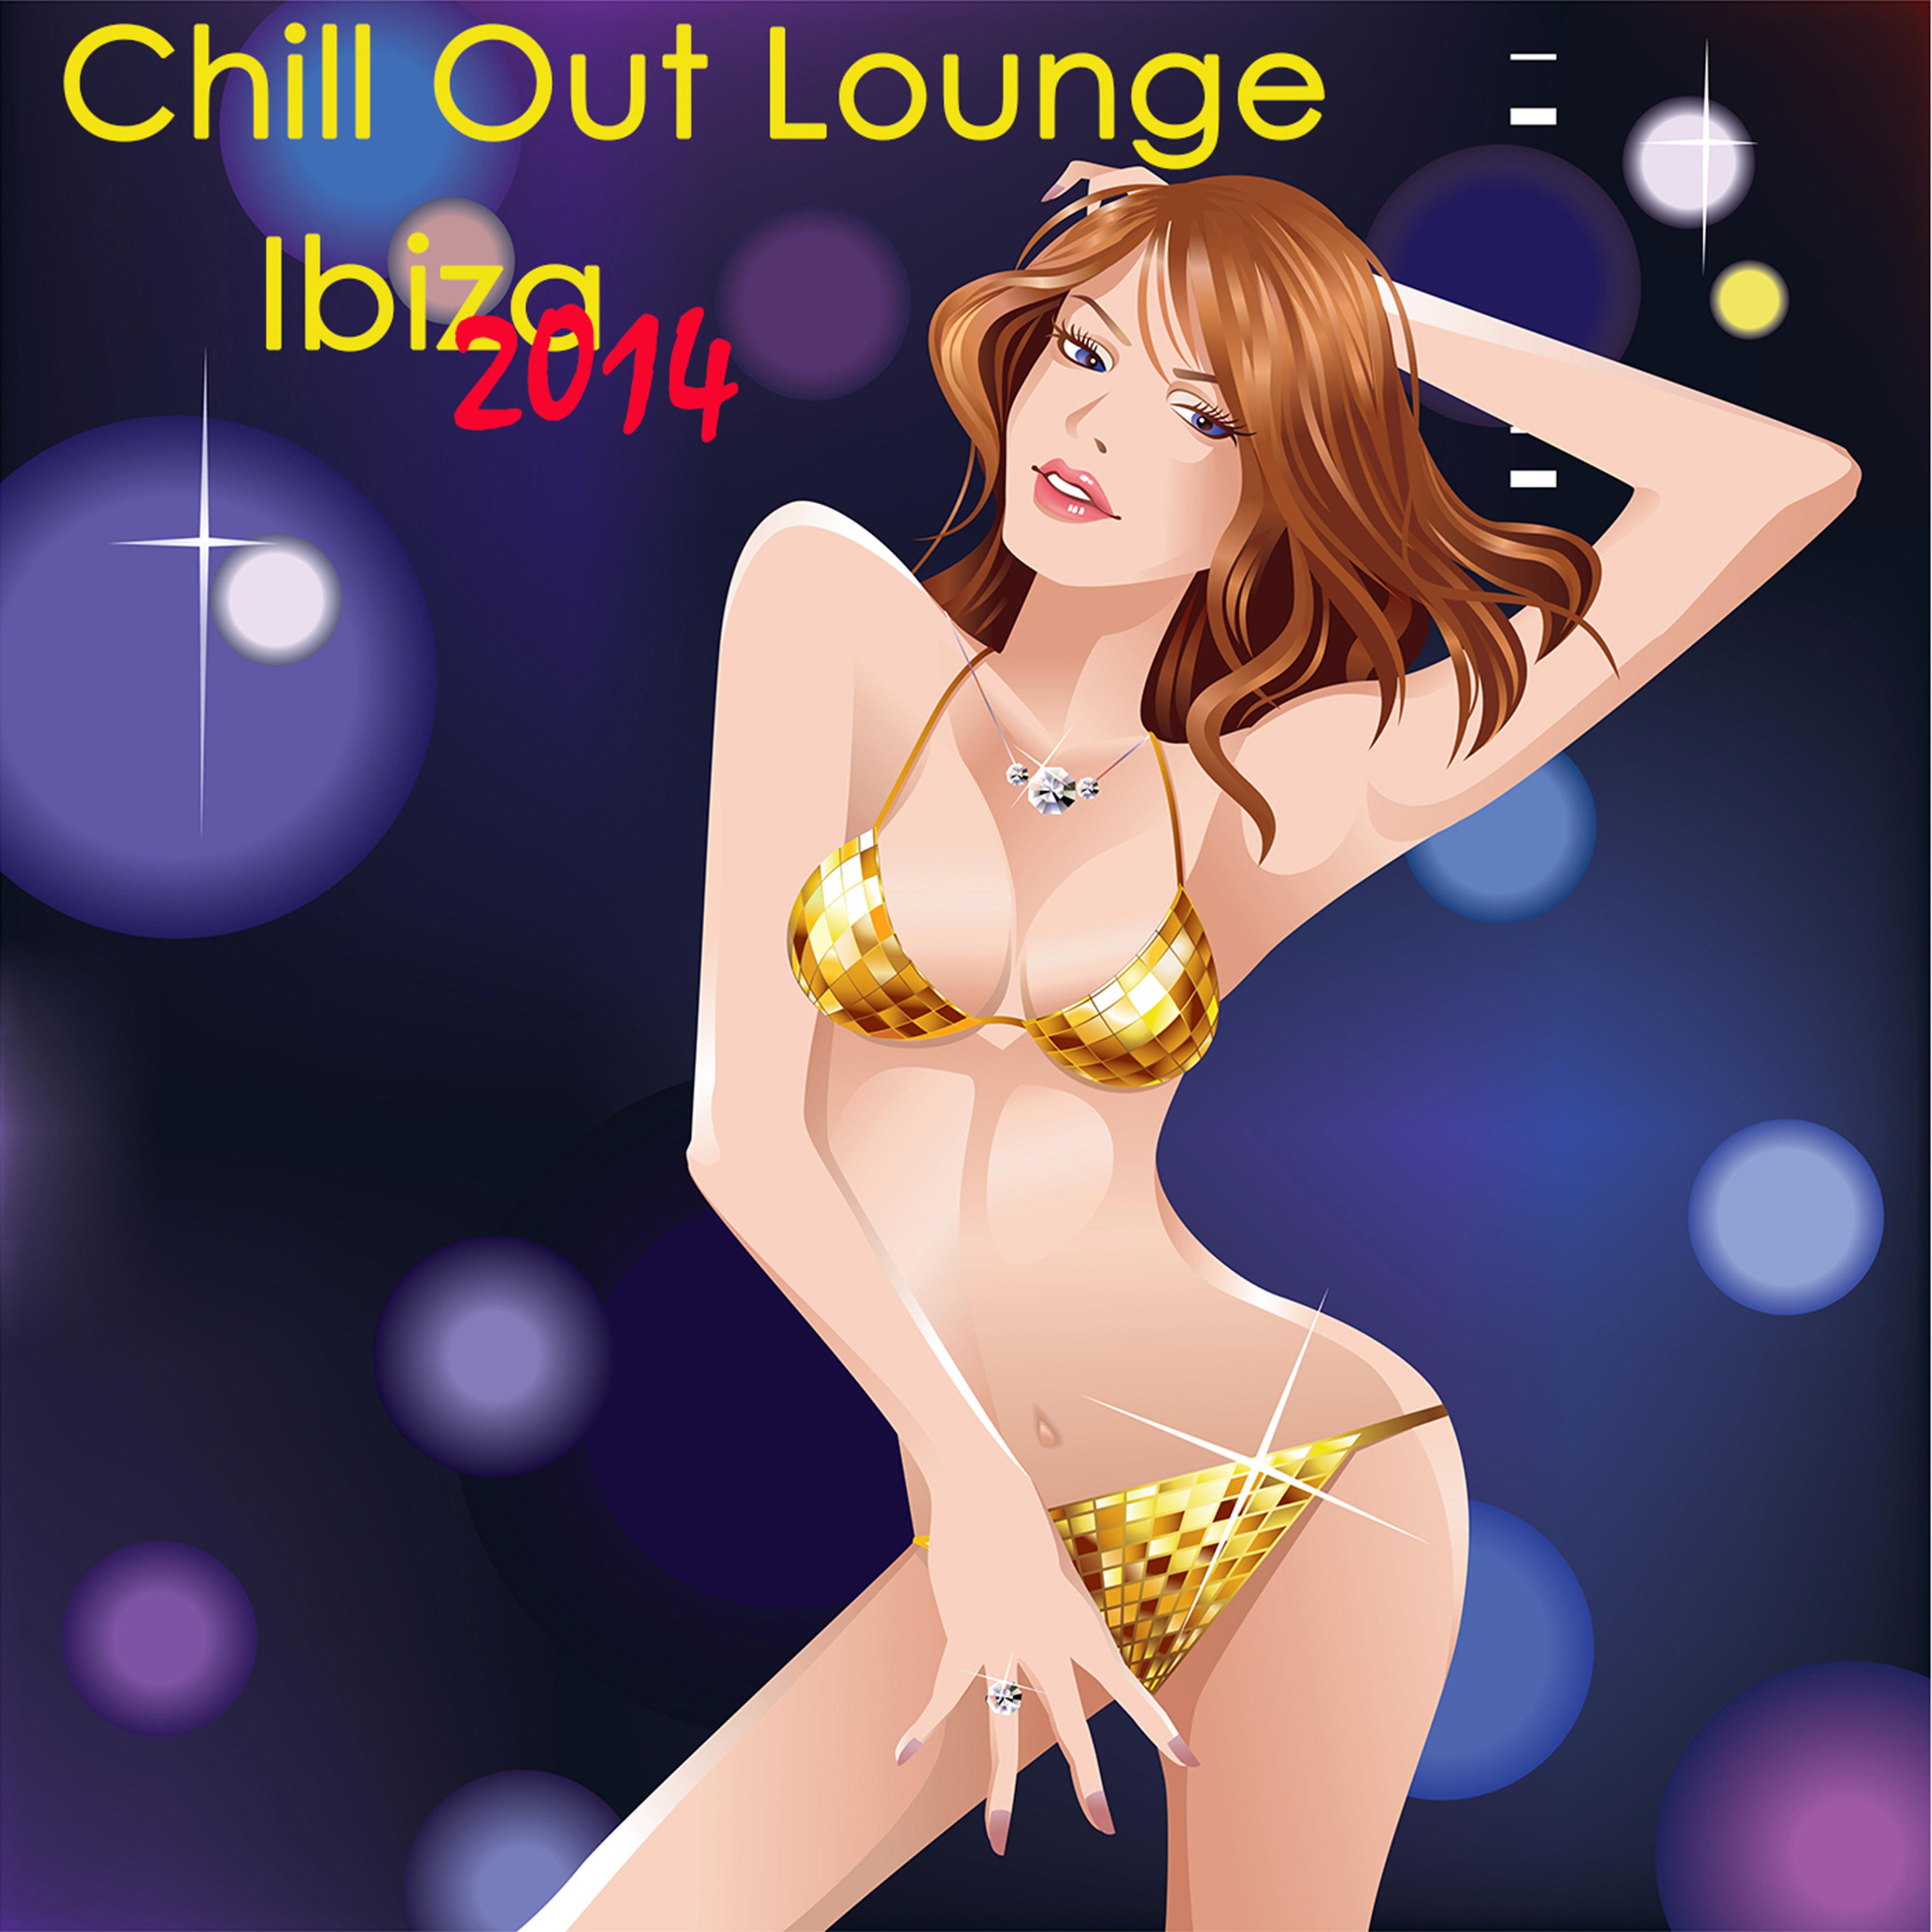 Chill Out Lounge Ibiza 2014 - Chillout Hot Music Floyd Bar Selection (Sueno Latino del Mar Chill Lounge Collection)